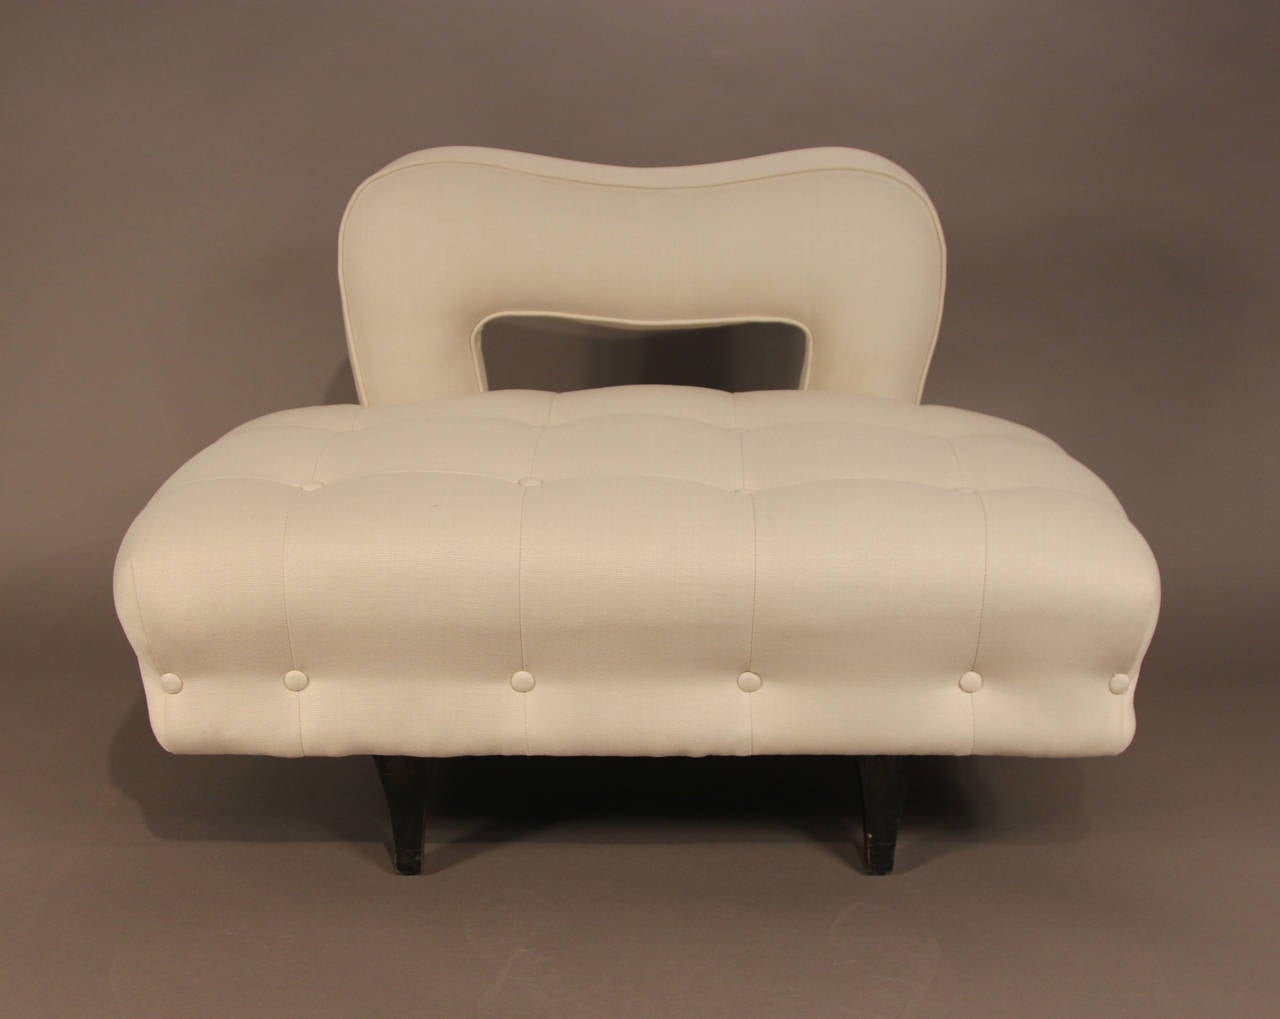 Vintage James Mont Divan with fresh upholstery. 39 inches wide, 24 inches deep, 27 inches high,and 15 inches is the seat height sleek and sexy.